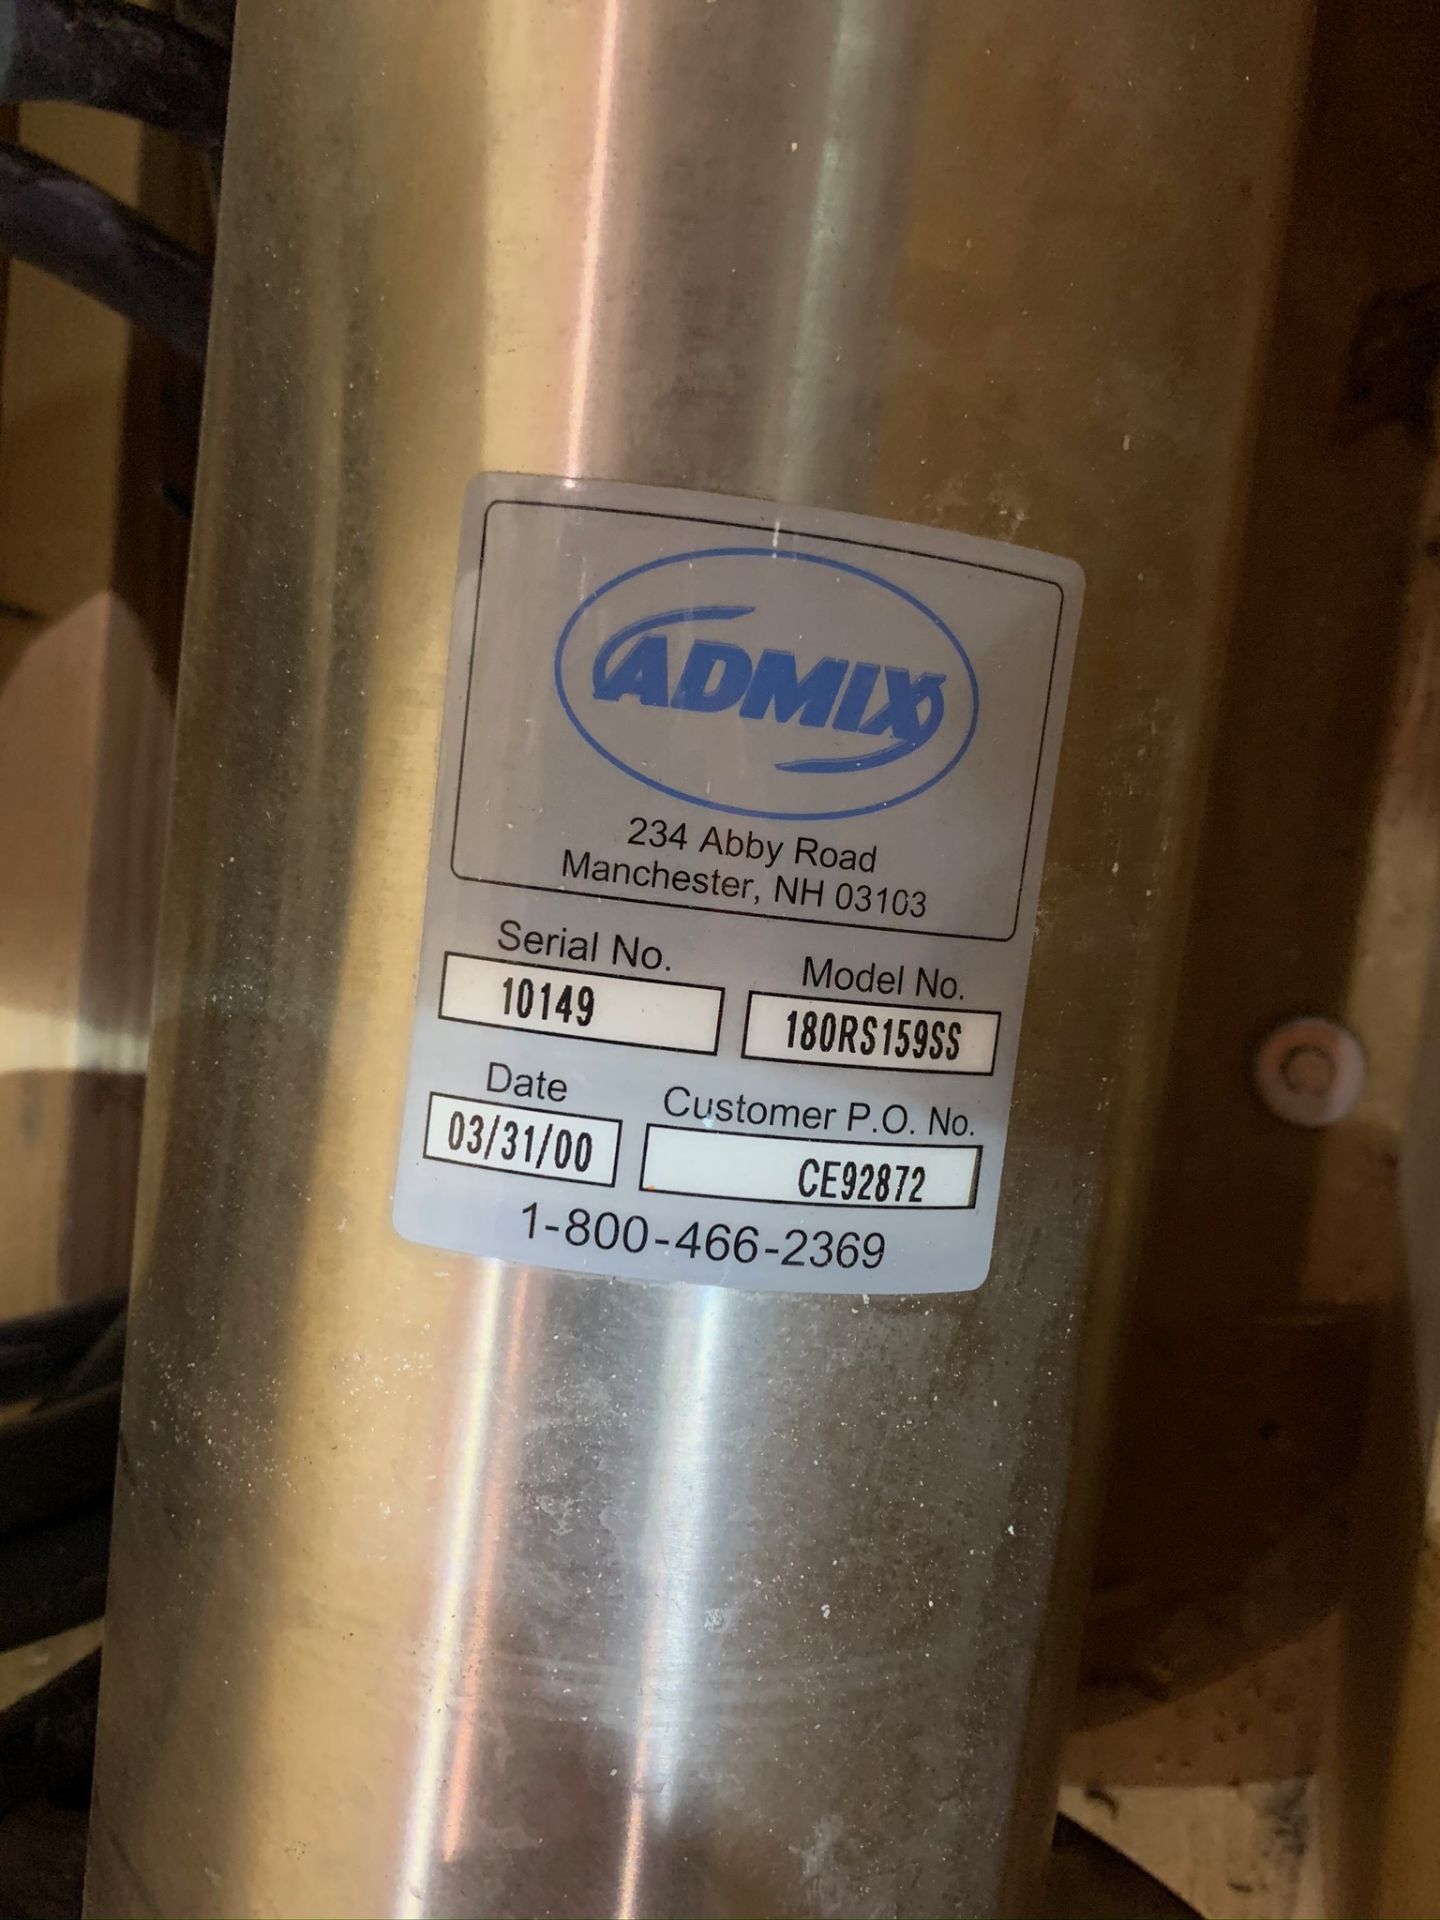 Admix Rotosolver Model 180RS159SS S/N 10149 (Rigging Fee - $75) - Image 4 of 5